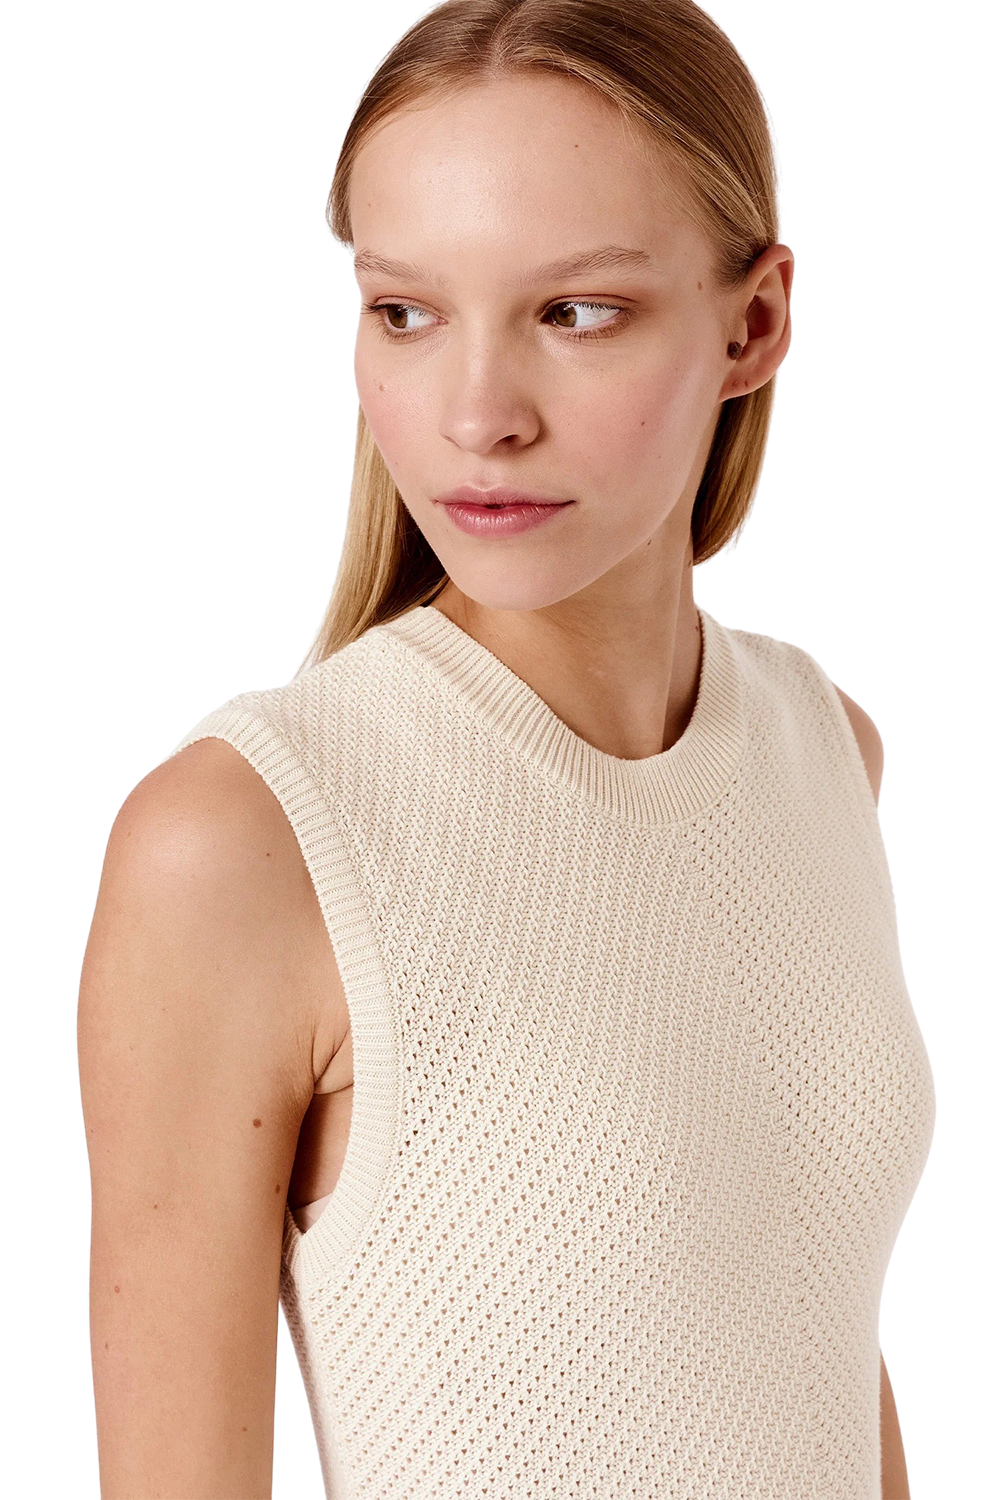 Knitted Pinpoint Dress - Cream